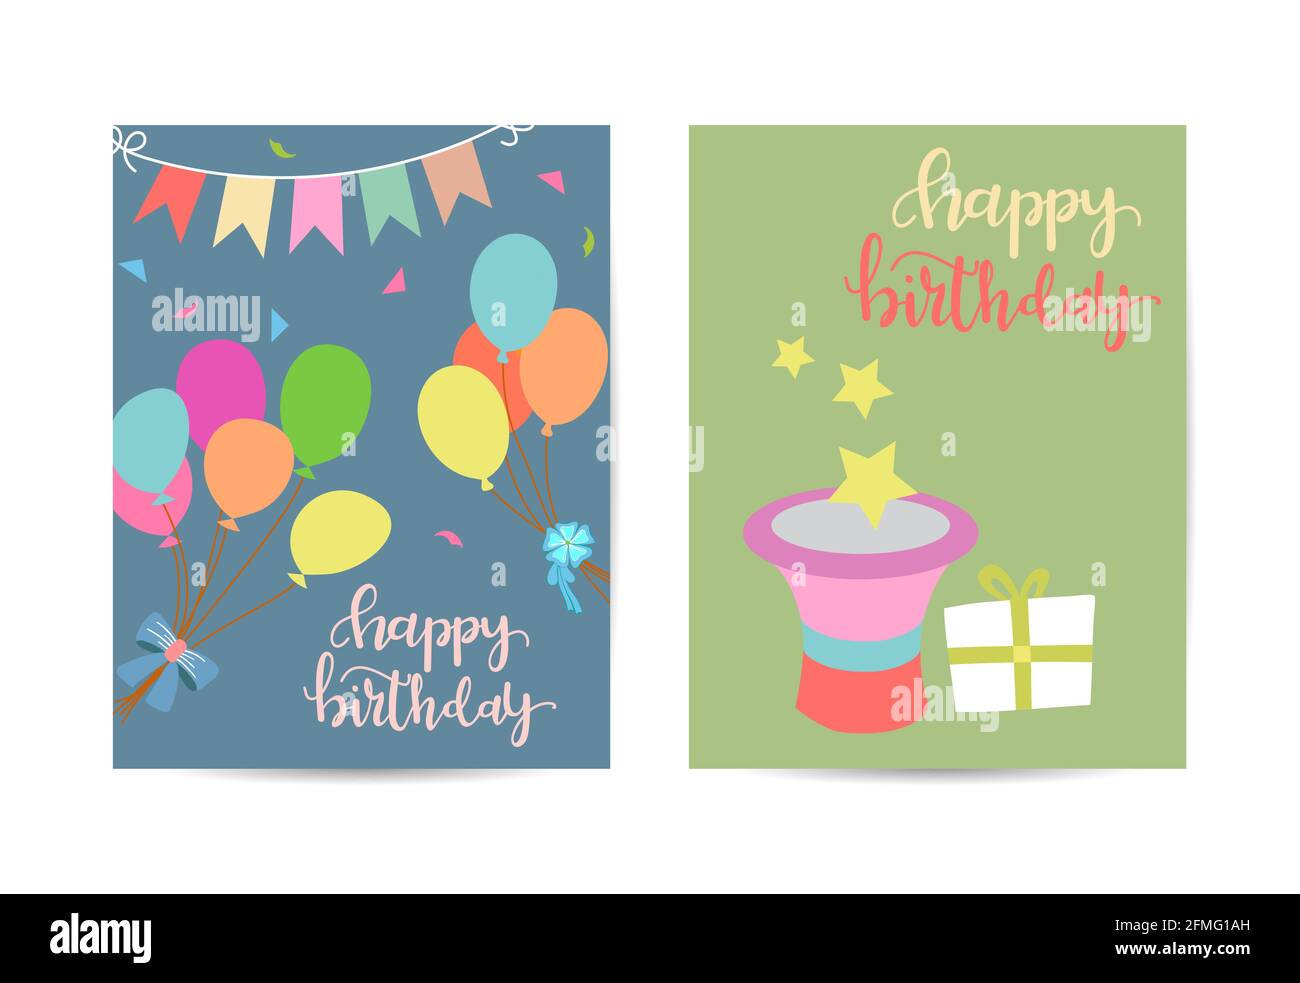 Greeting card happy birthday. Two variants of different color. Celebration and event background. Vector illustration. Stock Vector